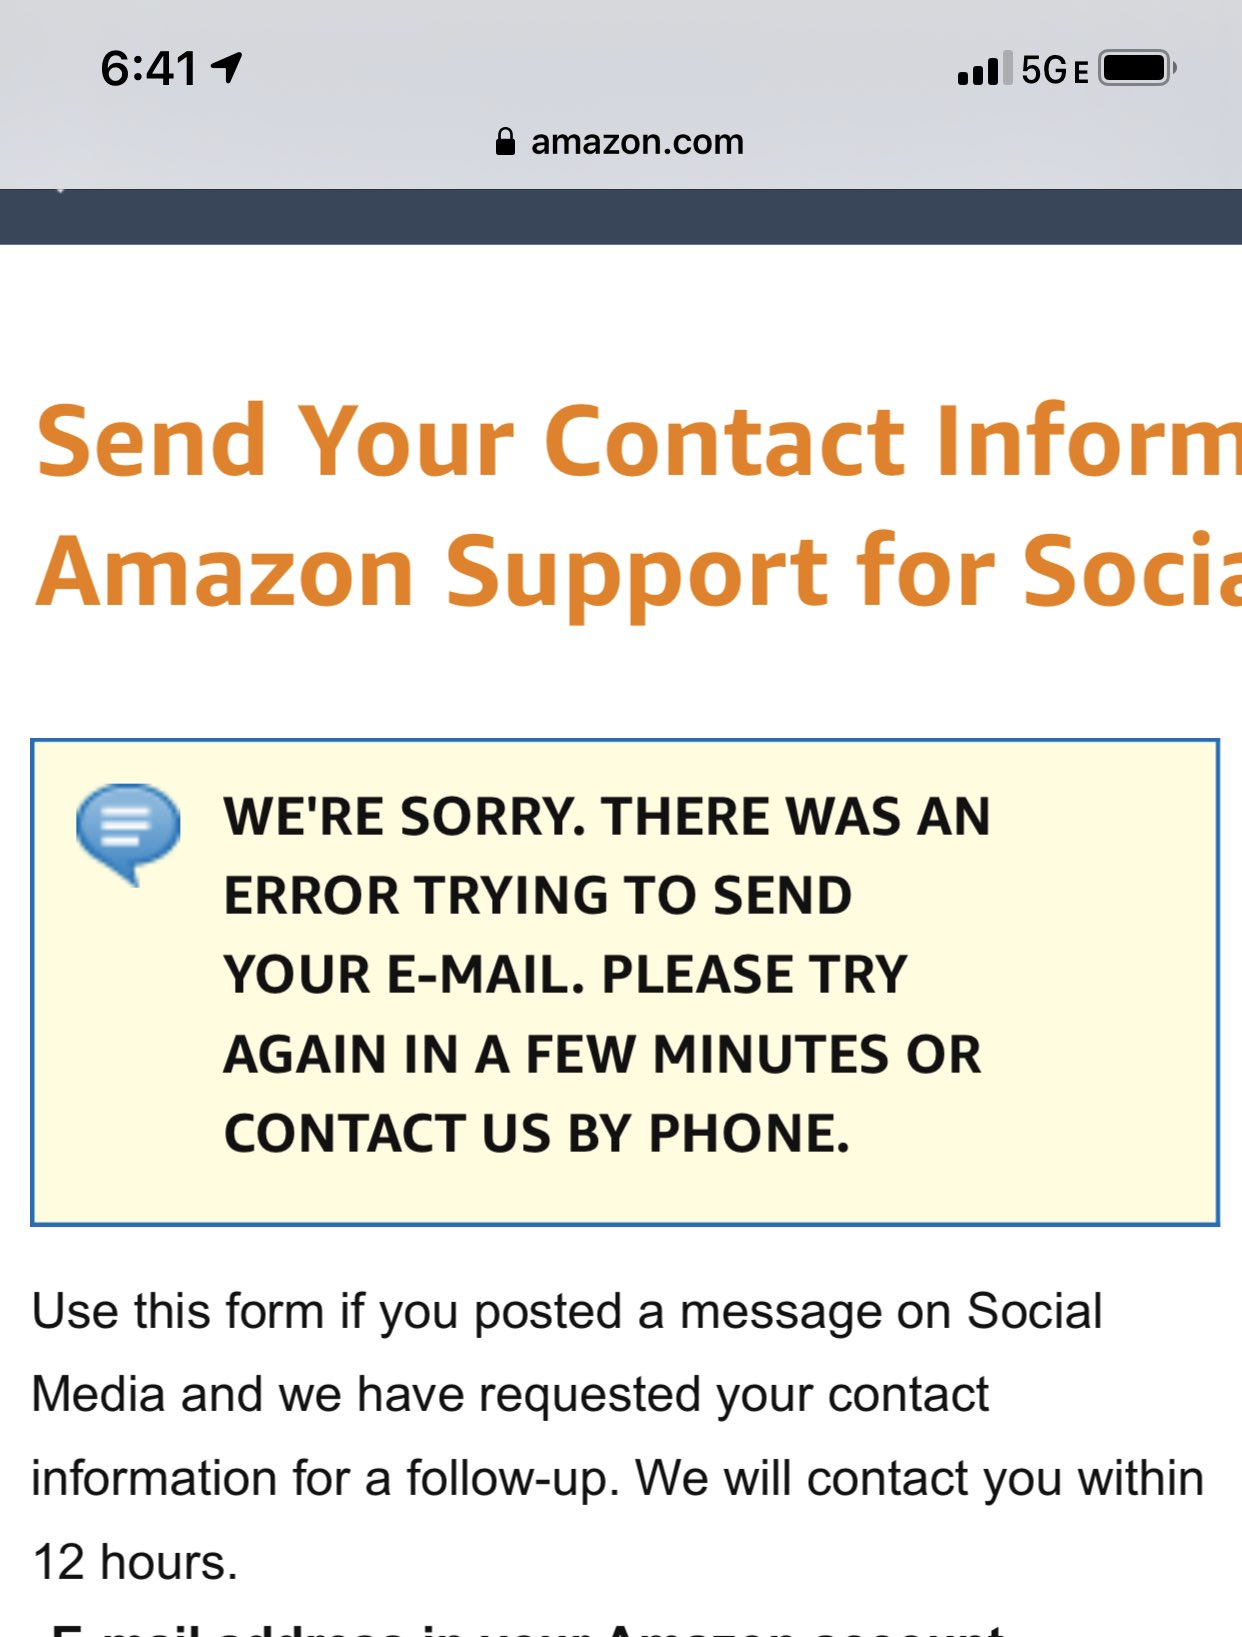 Amazon Support for social media